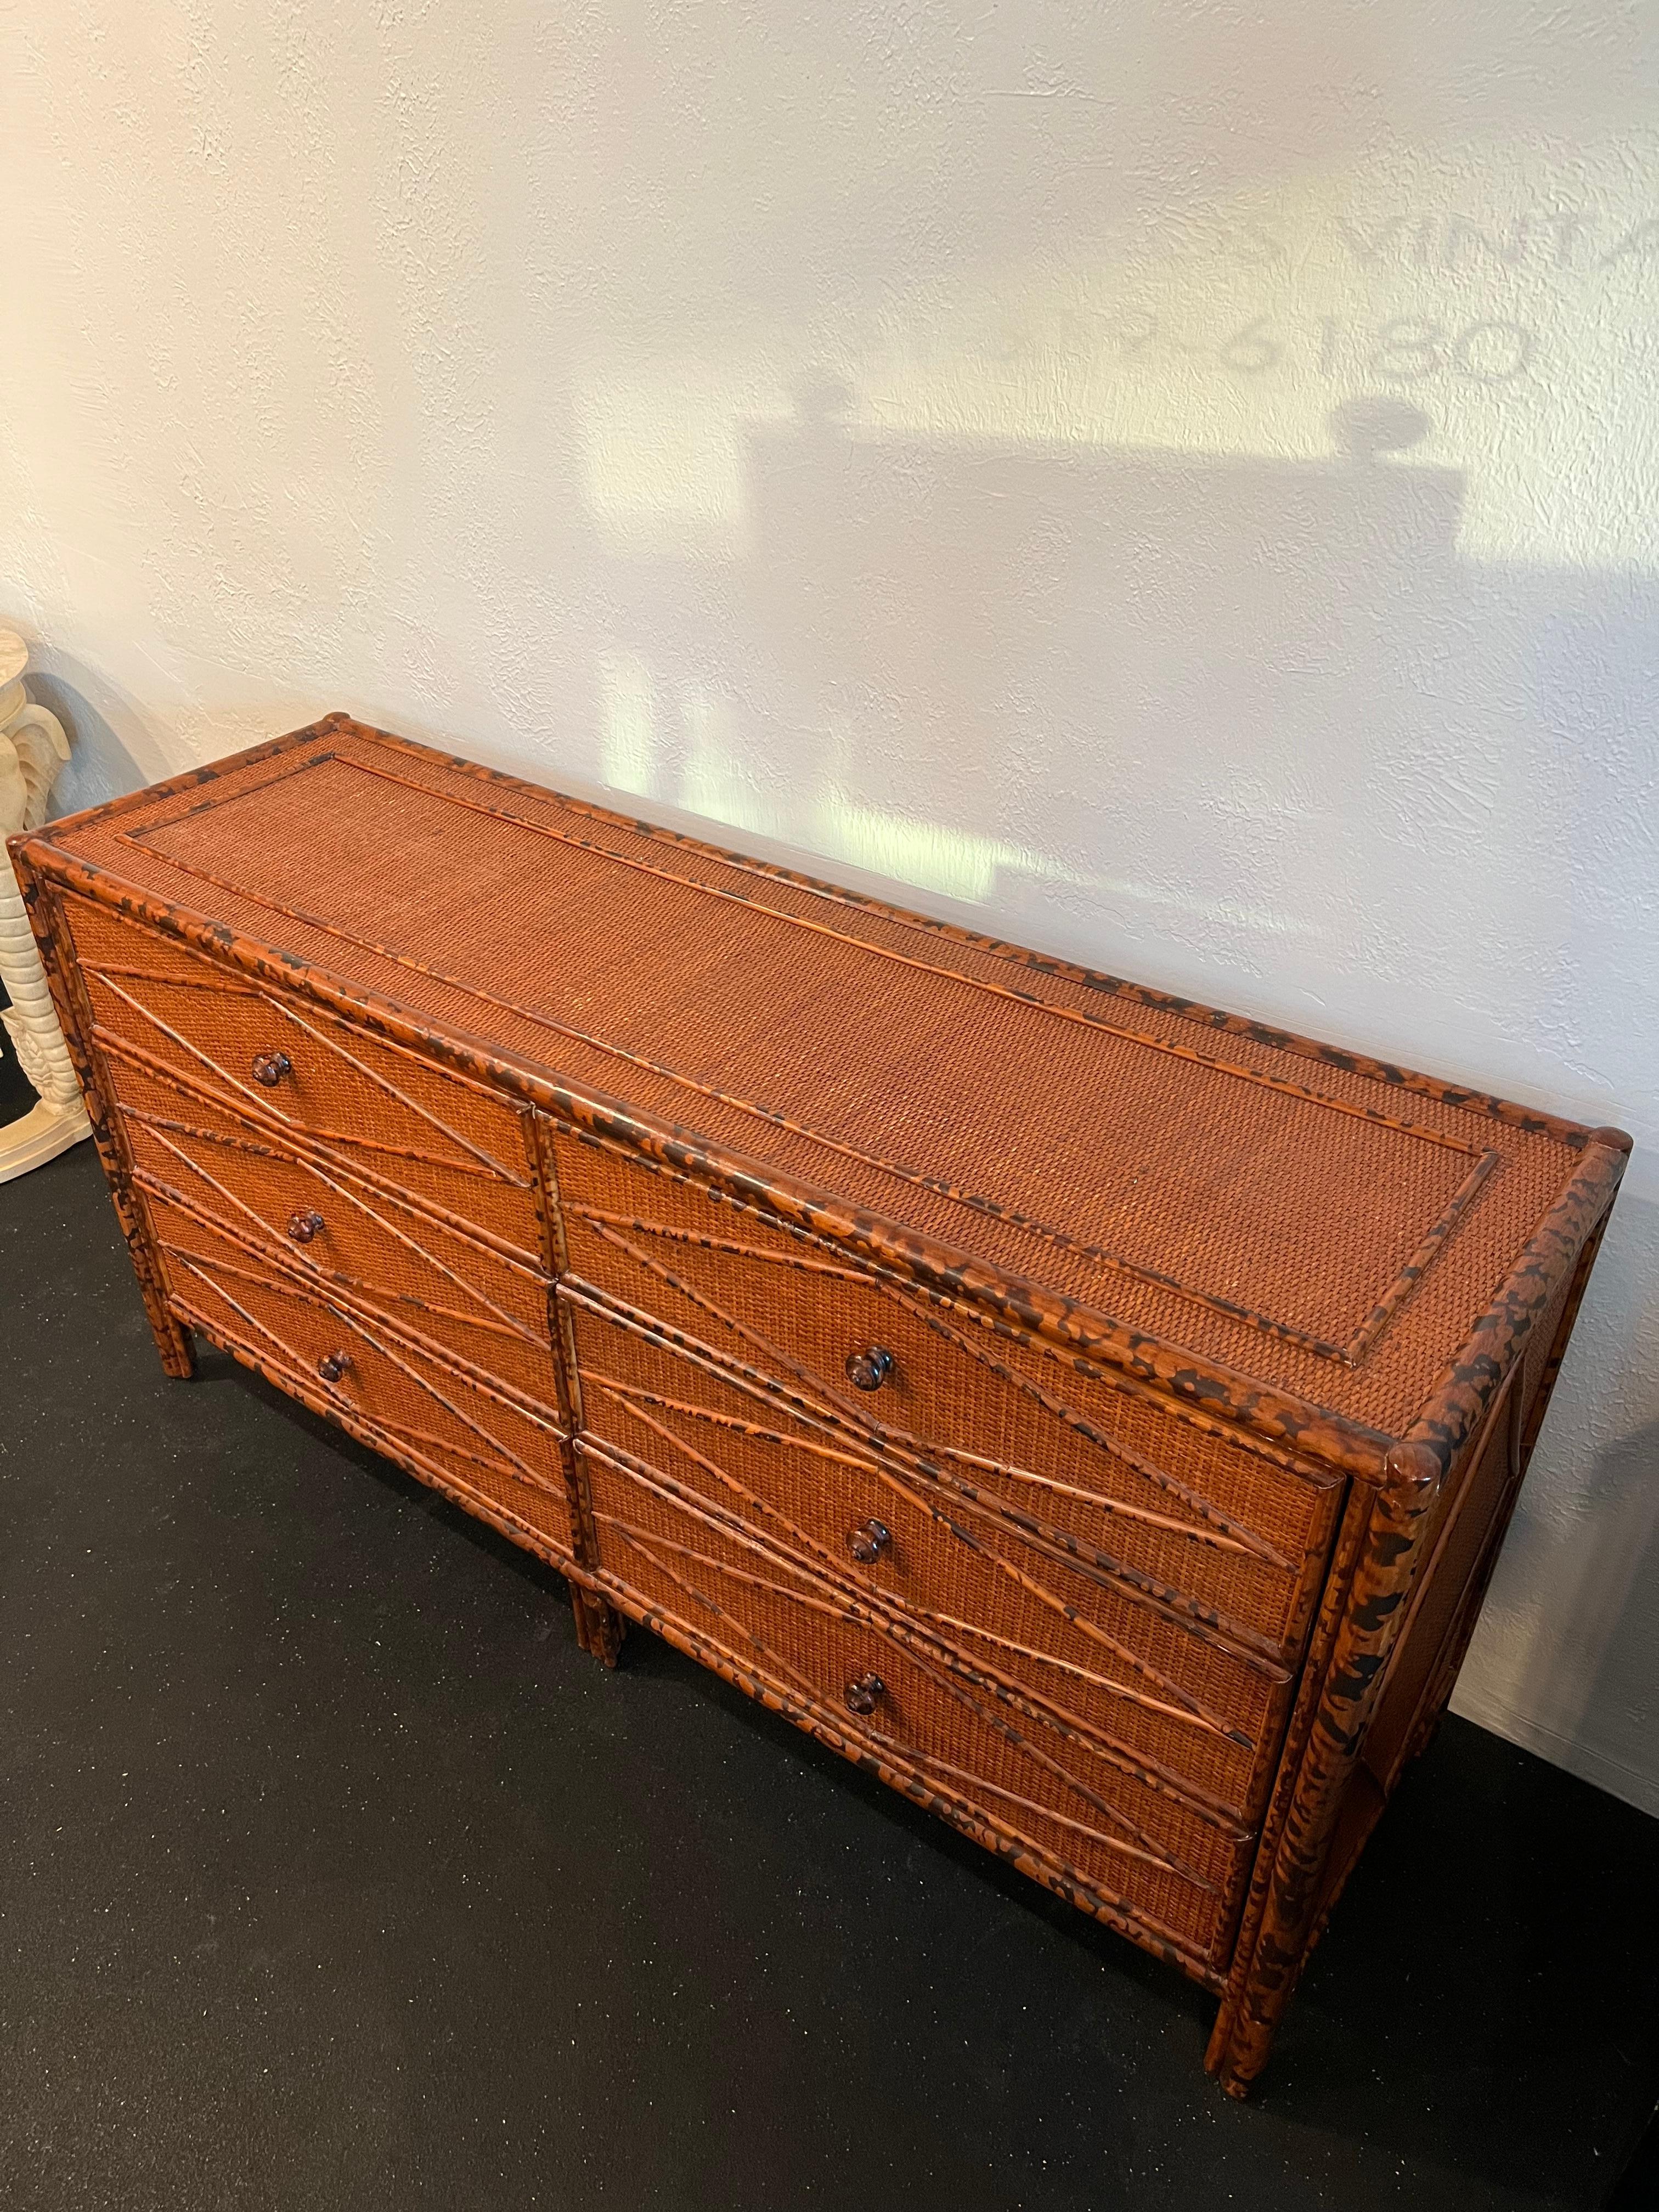 Unknown British Colonial Style Burnt Bamboo and Cane Dresser